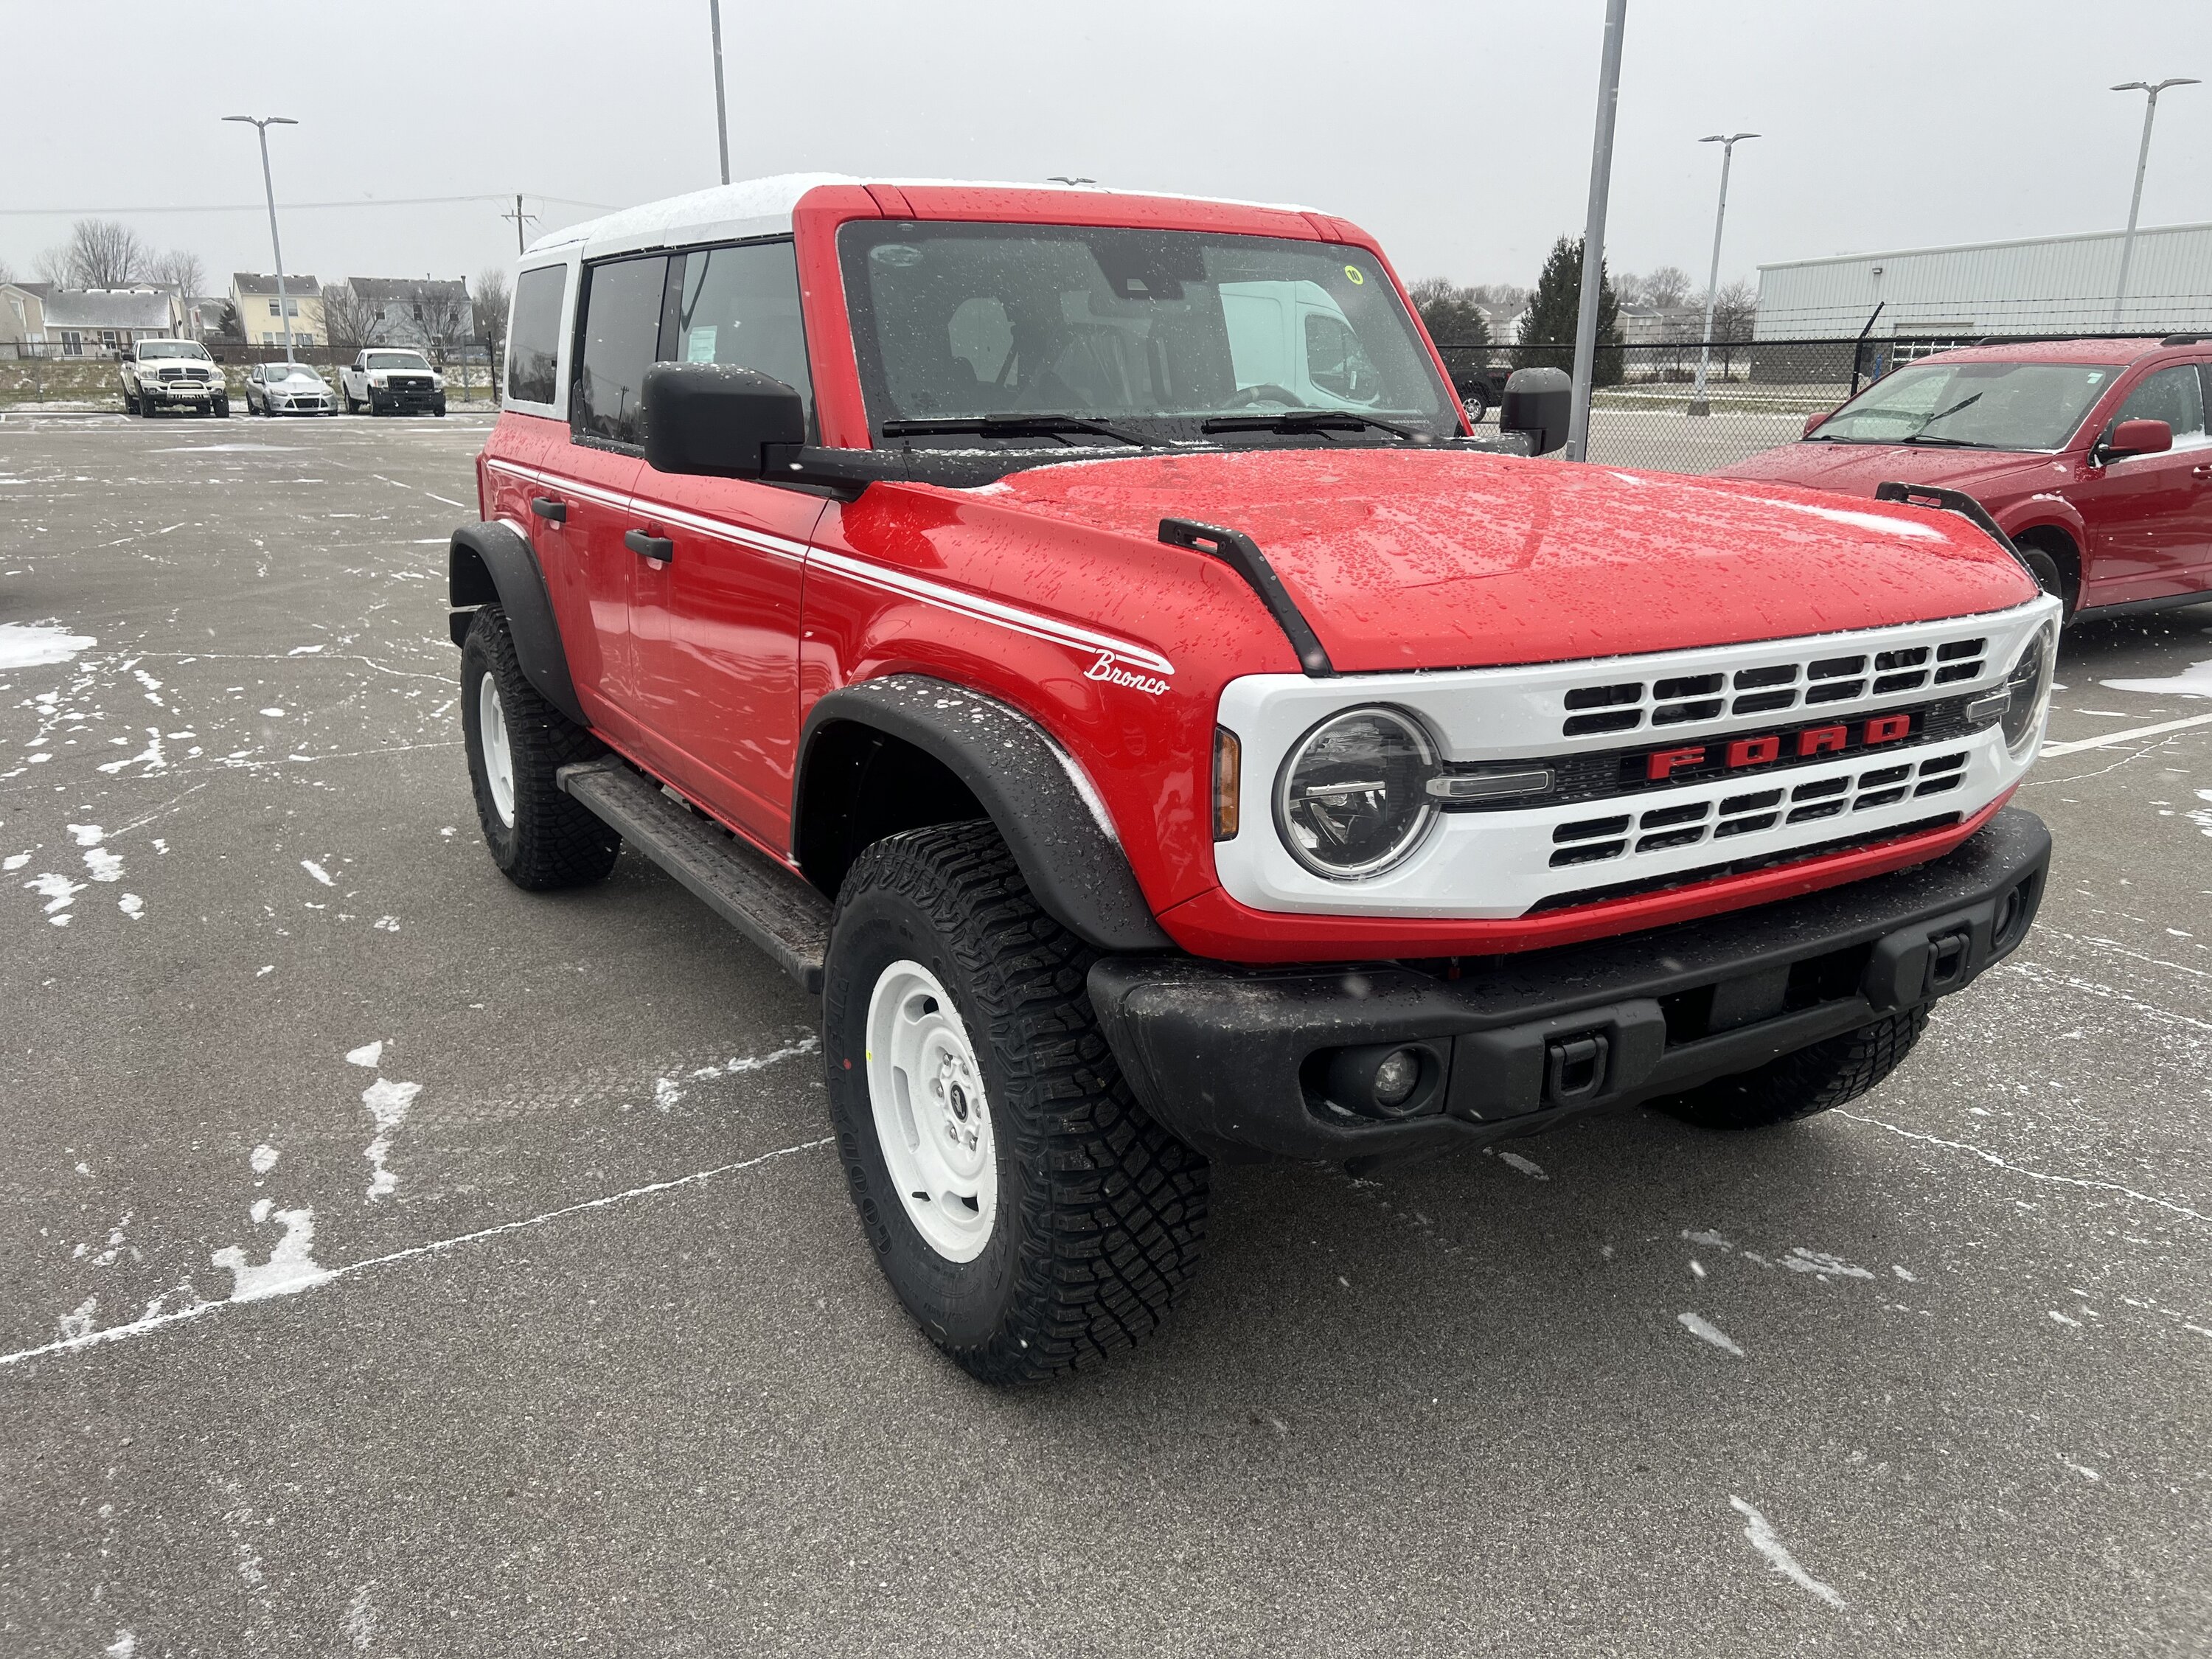 Ford Bronco First 2024 Bronco photos + rear cupholders! (More Photos: Suspension & Interior) 1705339153225